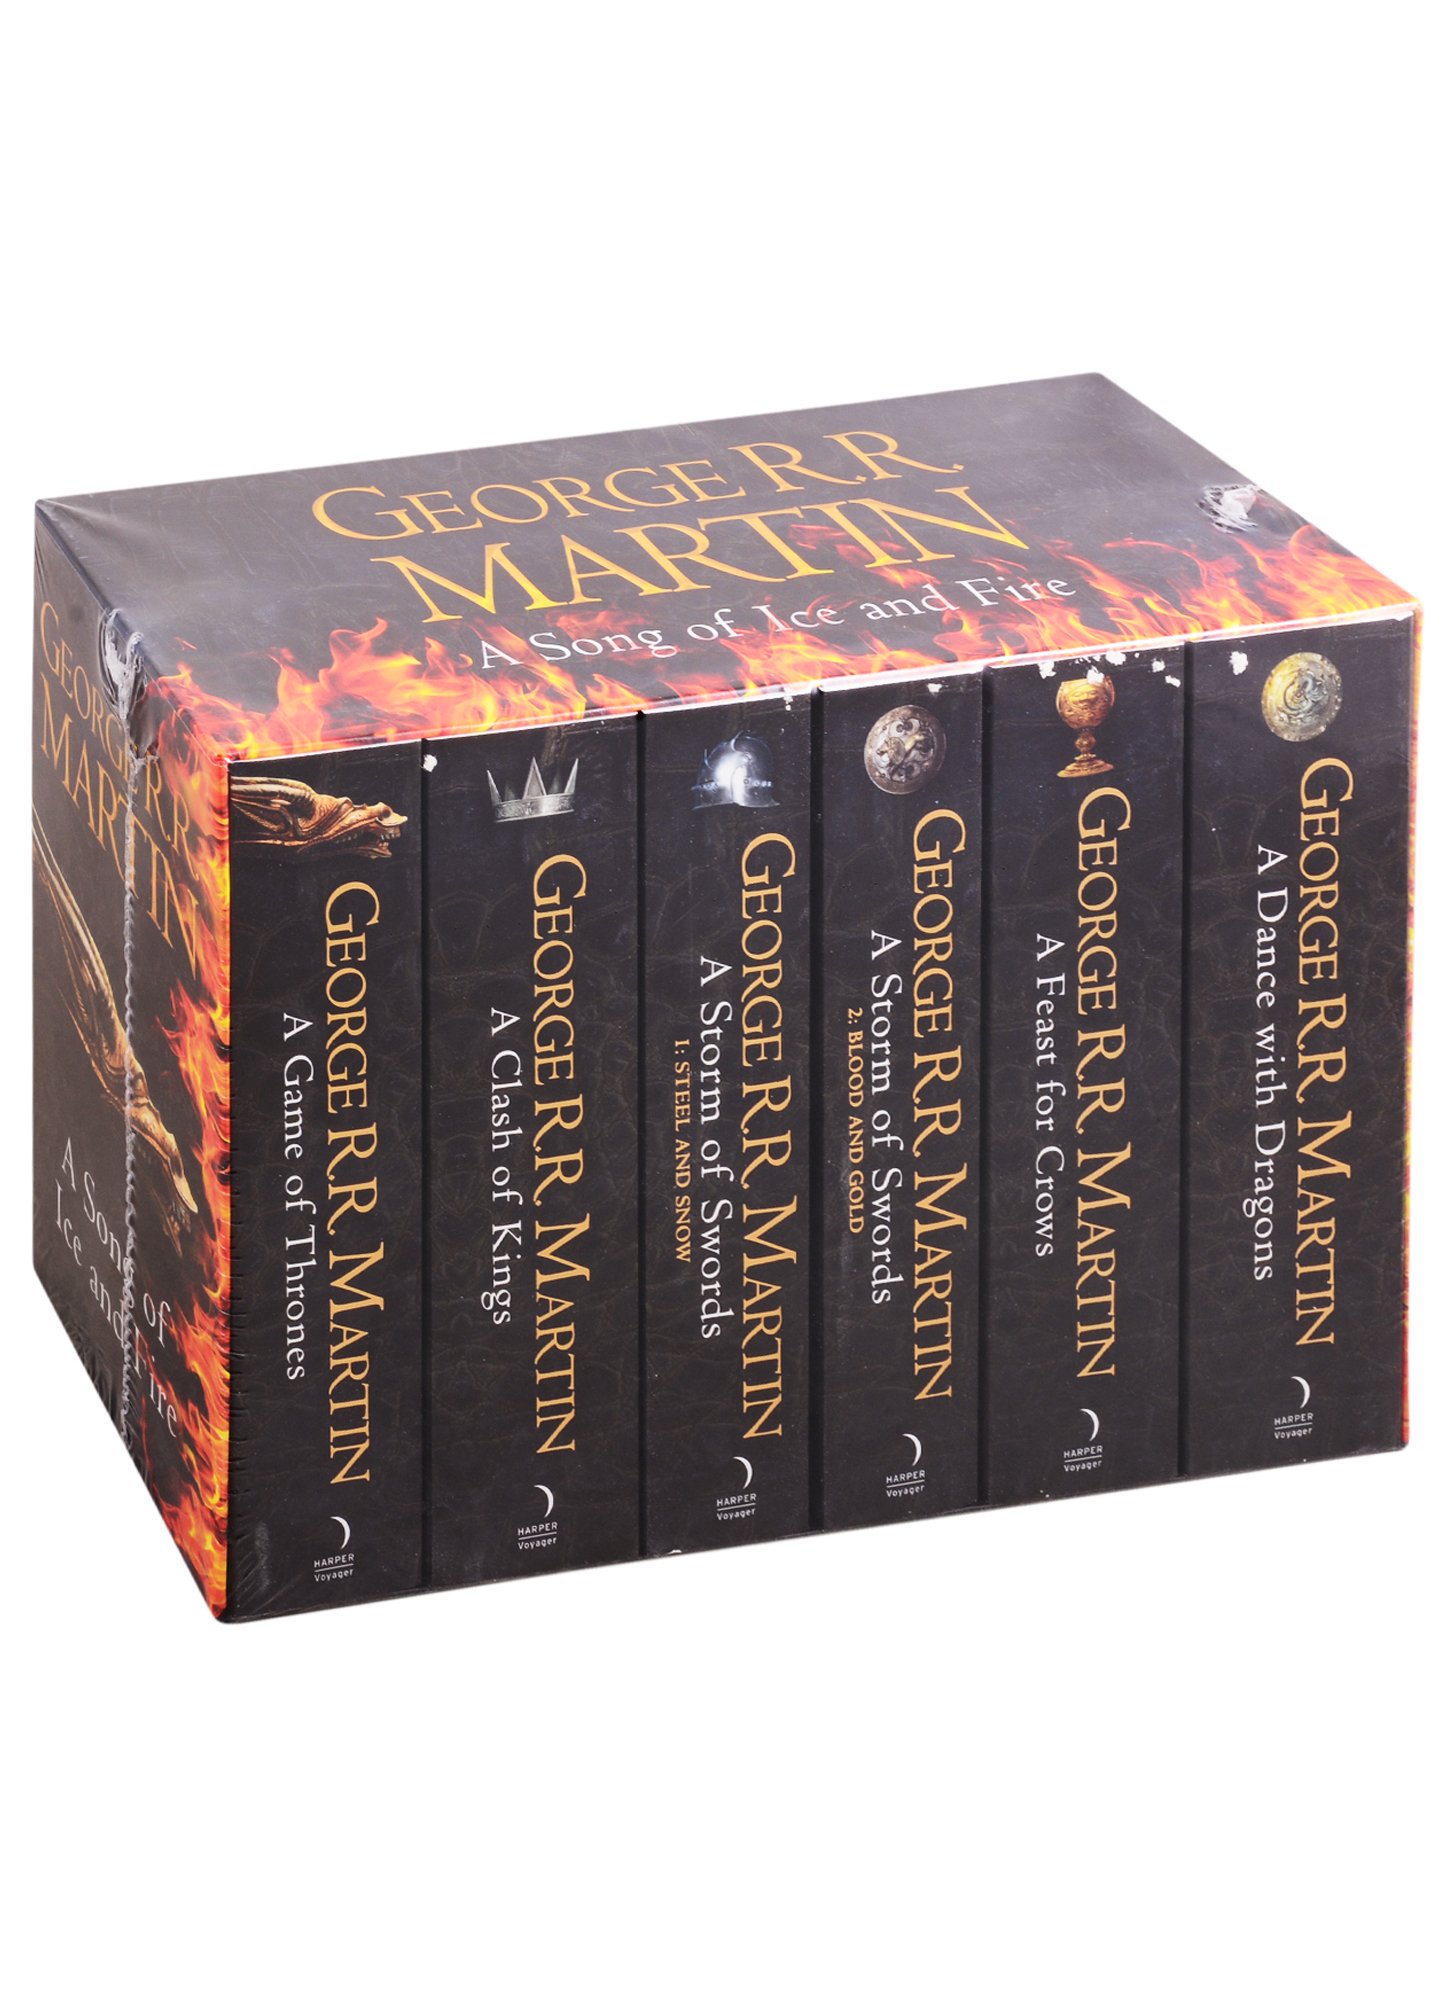 martin george r r a storm of swords part 2 blood and gold Martin George Raymond Richard Song of Ice and Fire-Game of Thrones: The complete box set of all 6 books Martin George R. R.